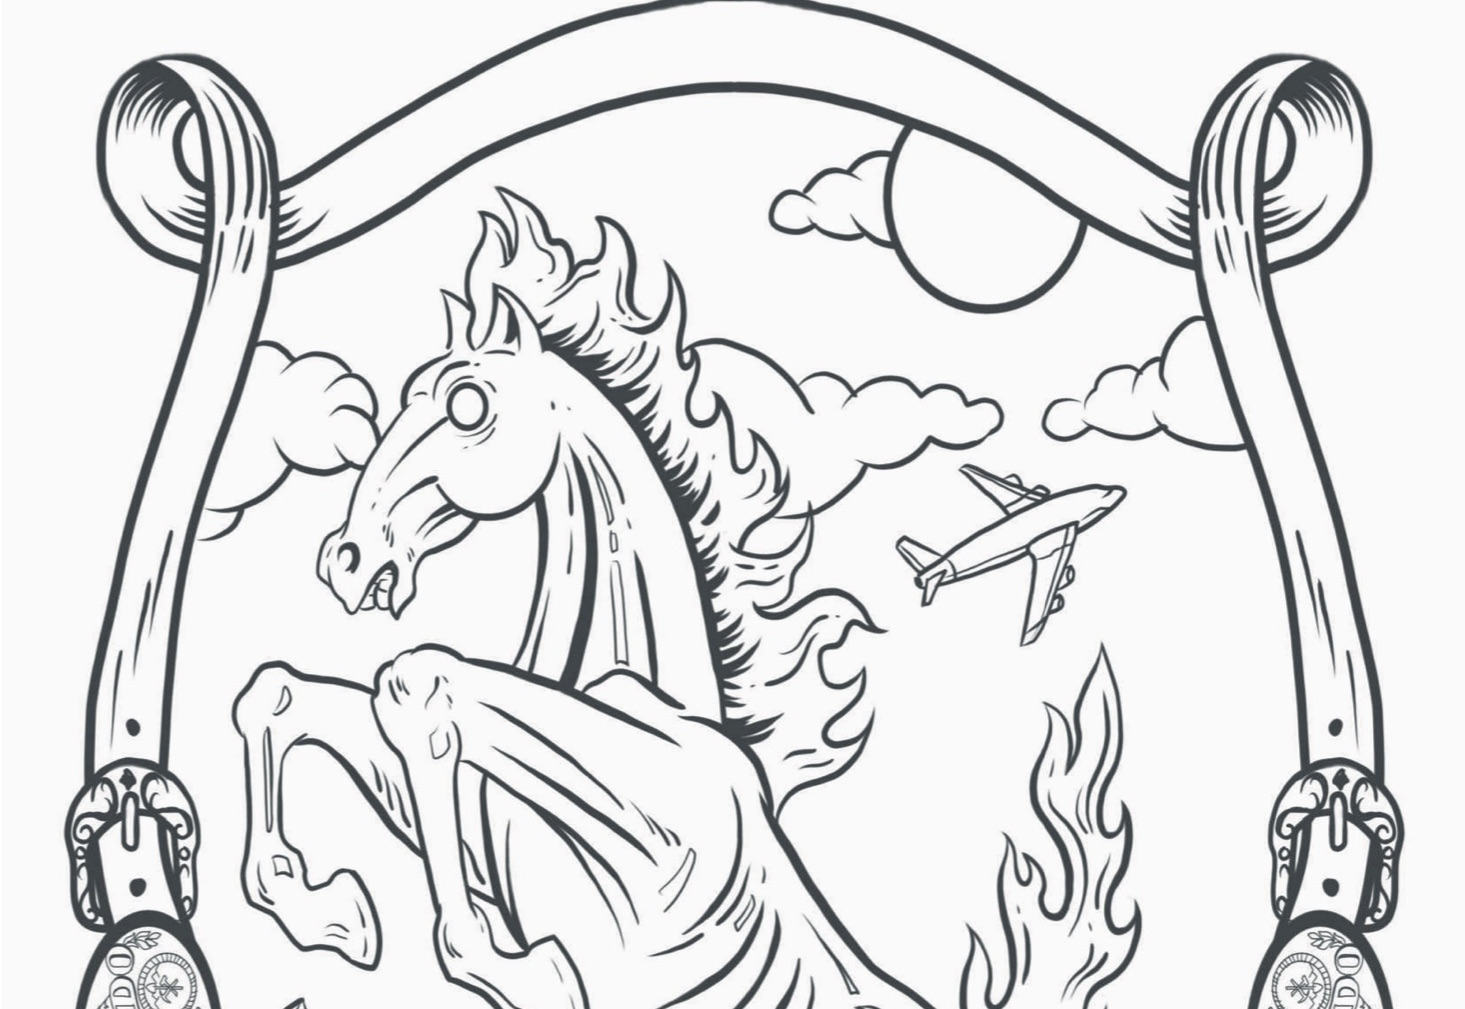 DOWNLOAD: Colorado coloring pages published in The Denver Post